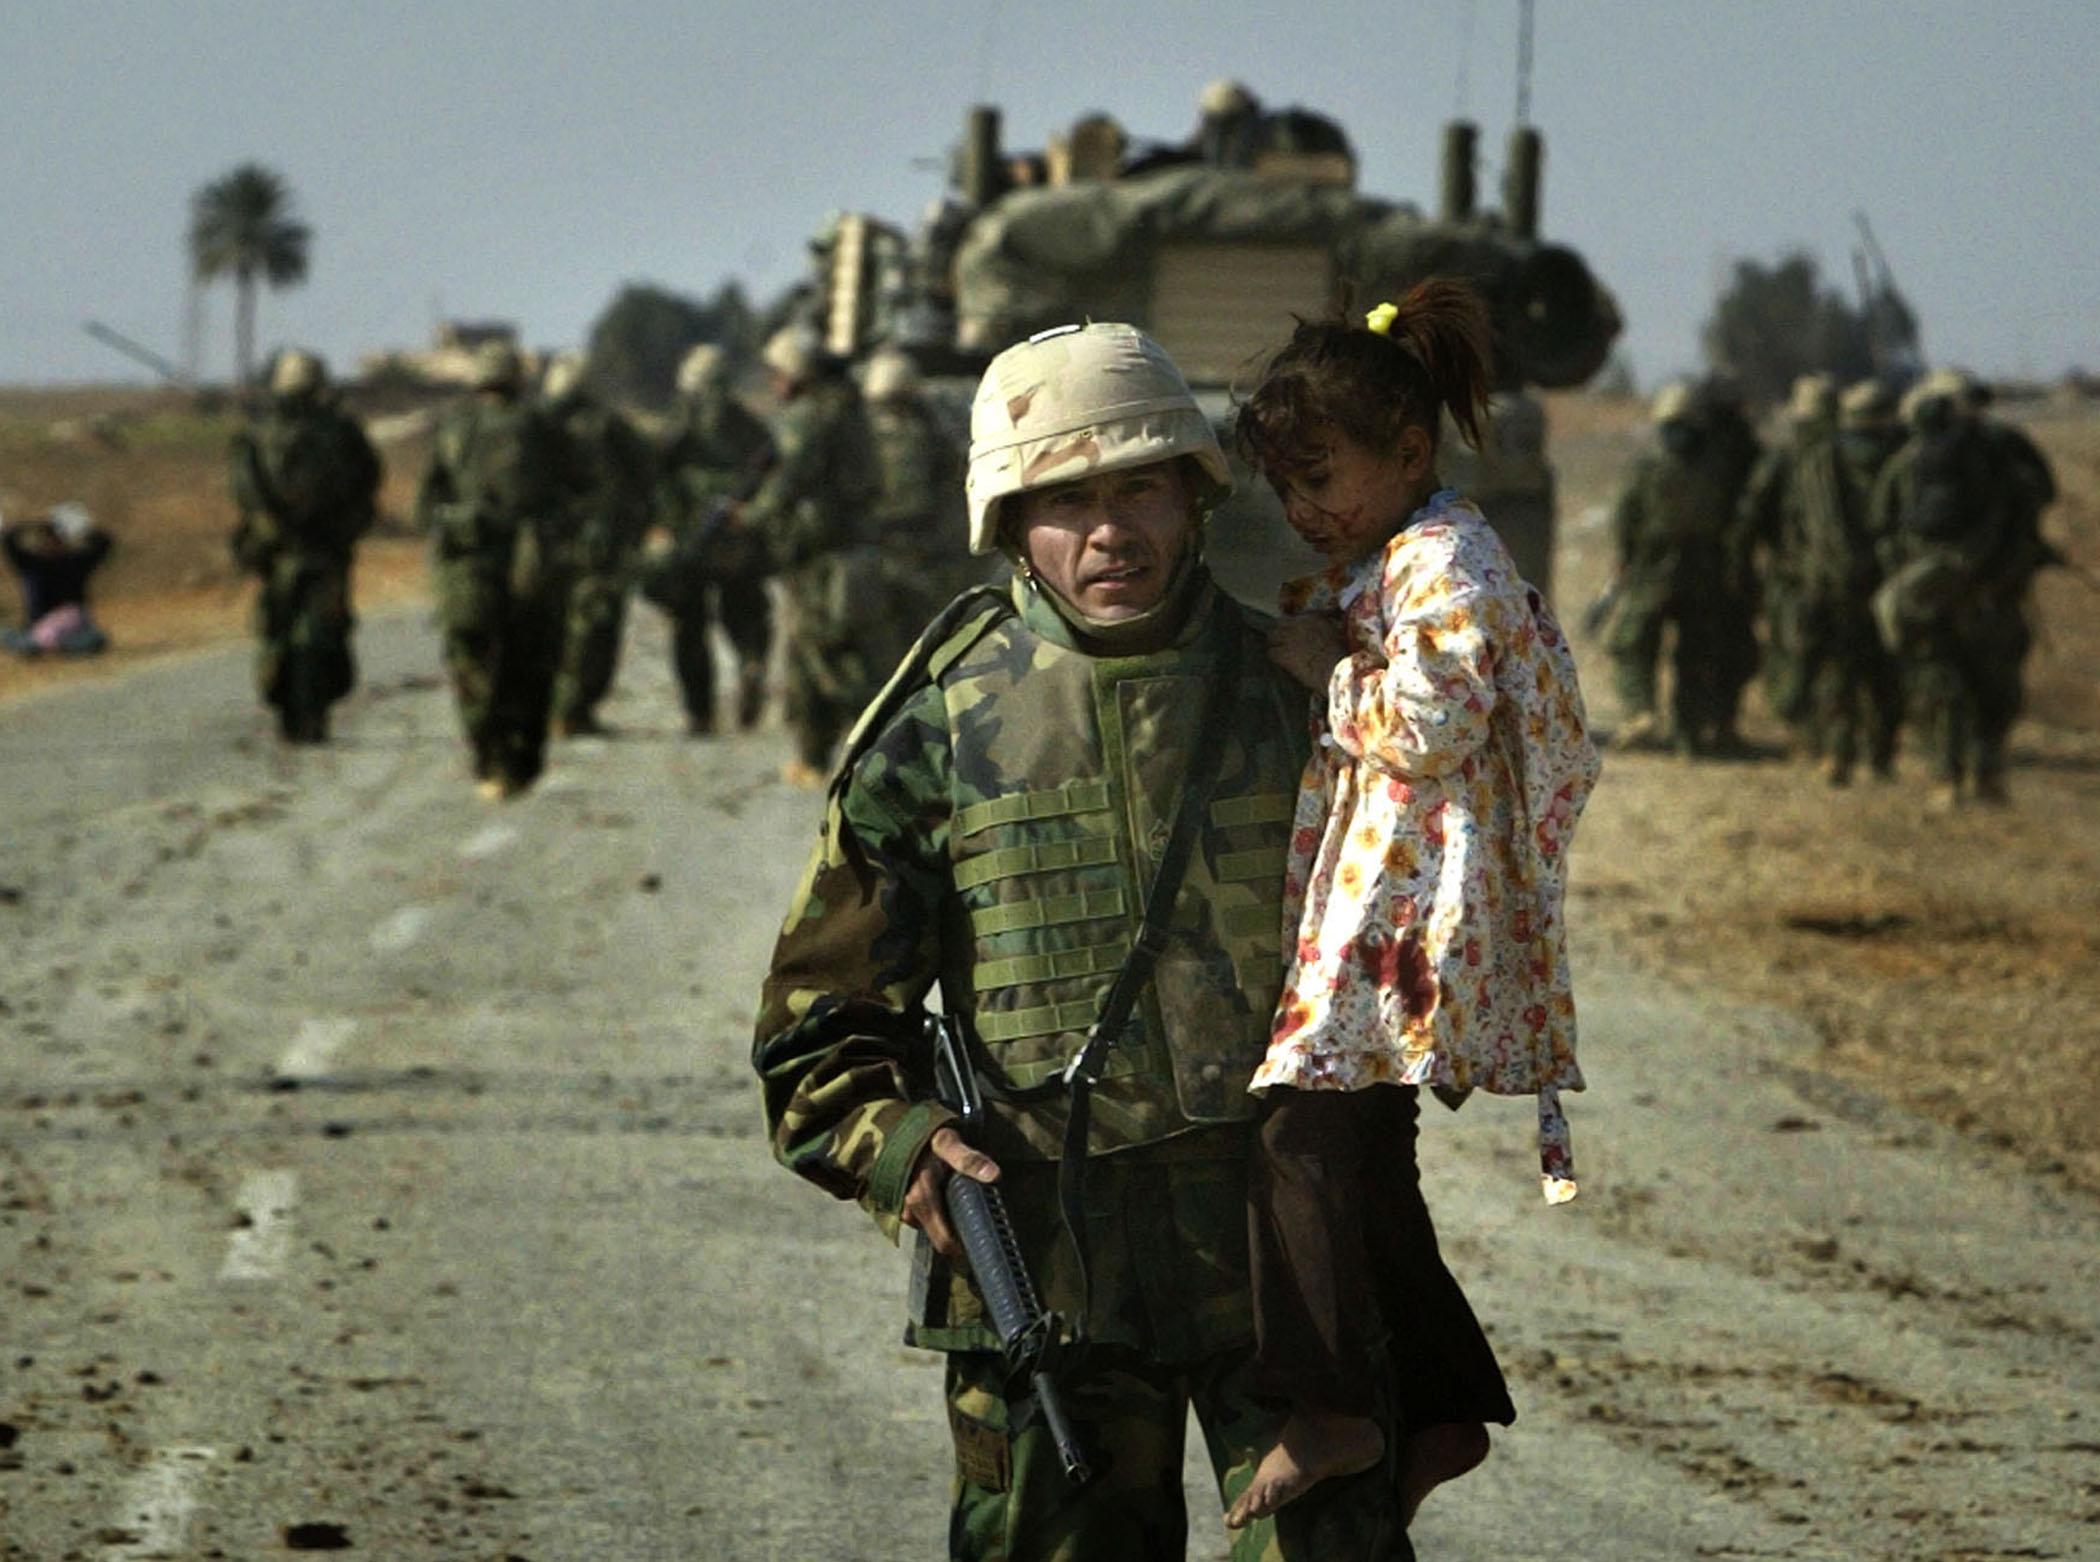 A U.S. marine carries a wounded Iraqi girl from a shooting scene in central Iraq March 29, 2003. Confused front line crossfire ripped apart an Iraqi family on Saturday after local soldiers appeared to force civilians towards U.S. marines positions. 